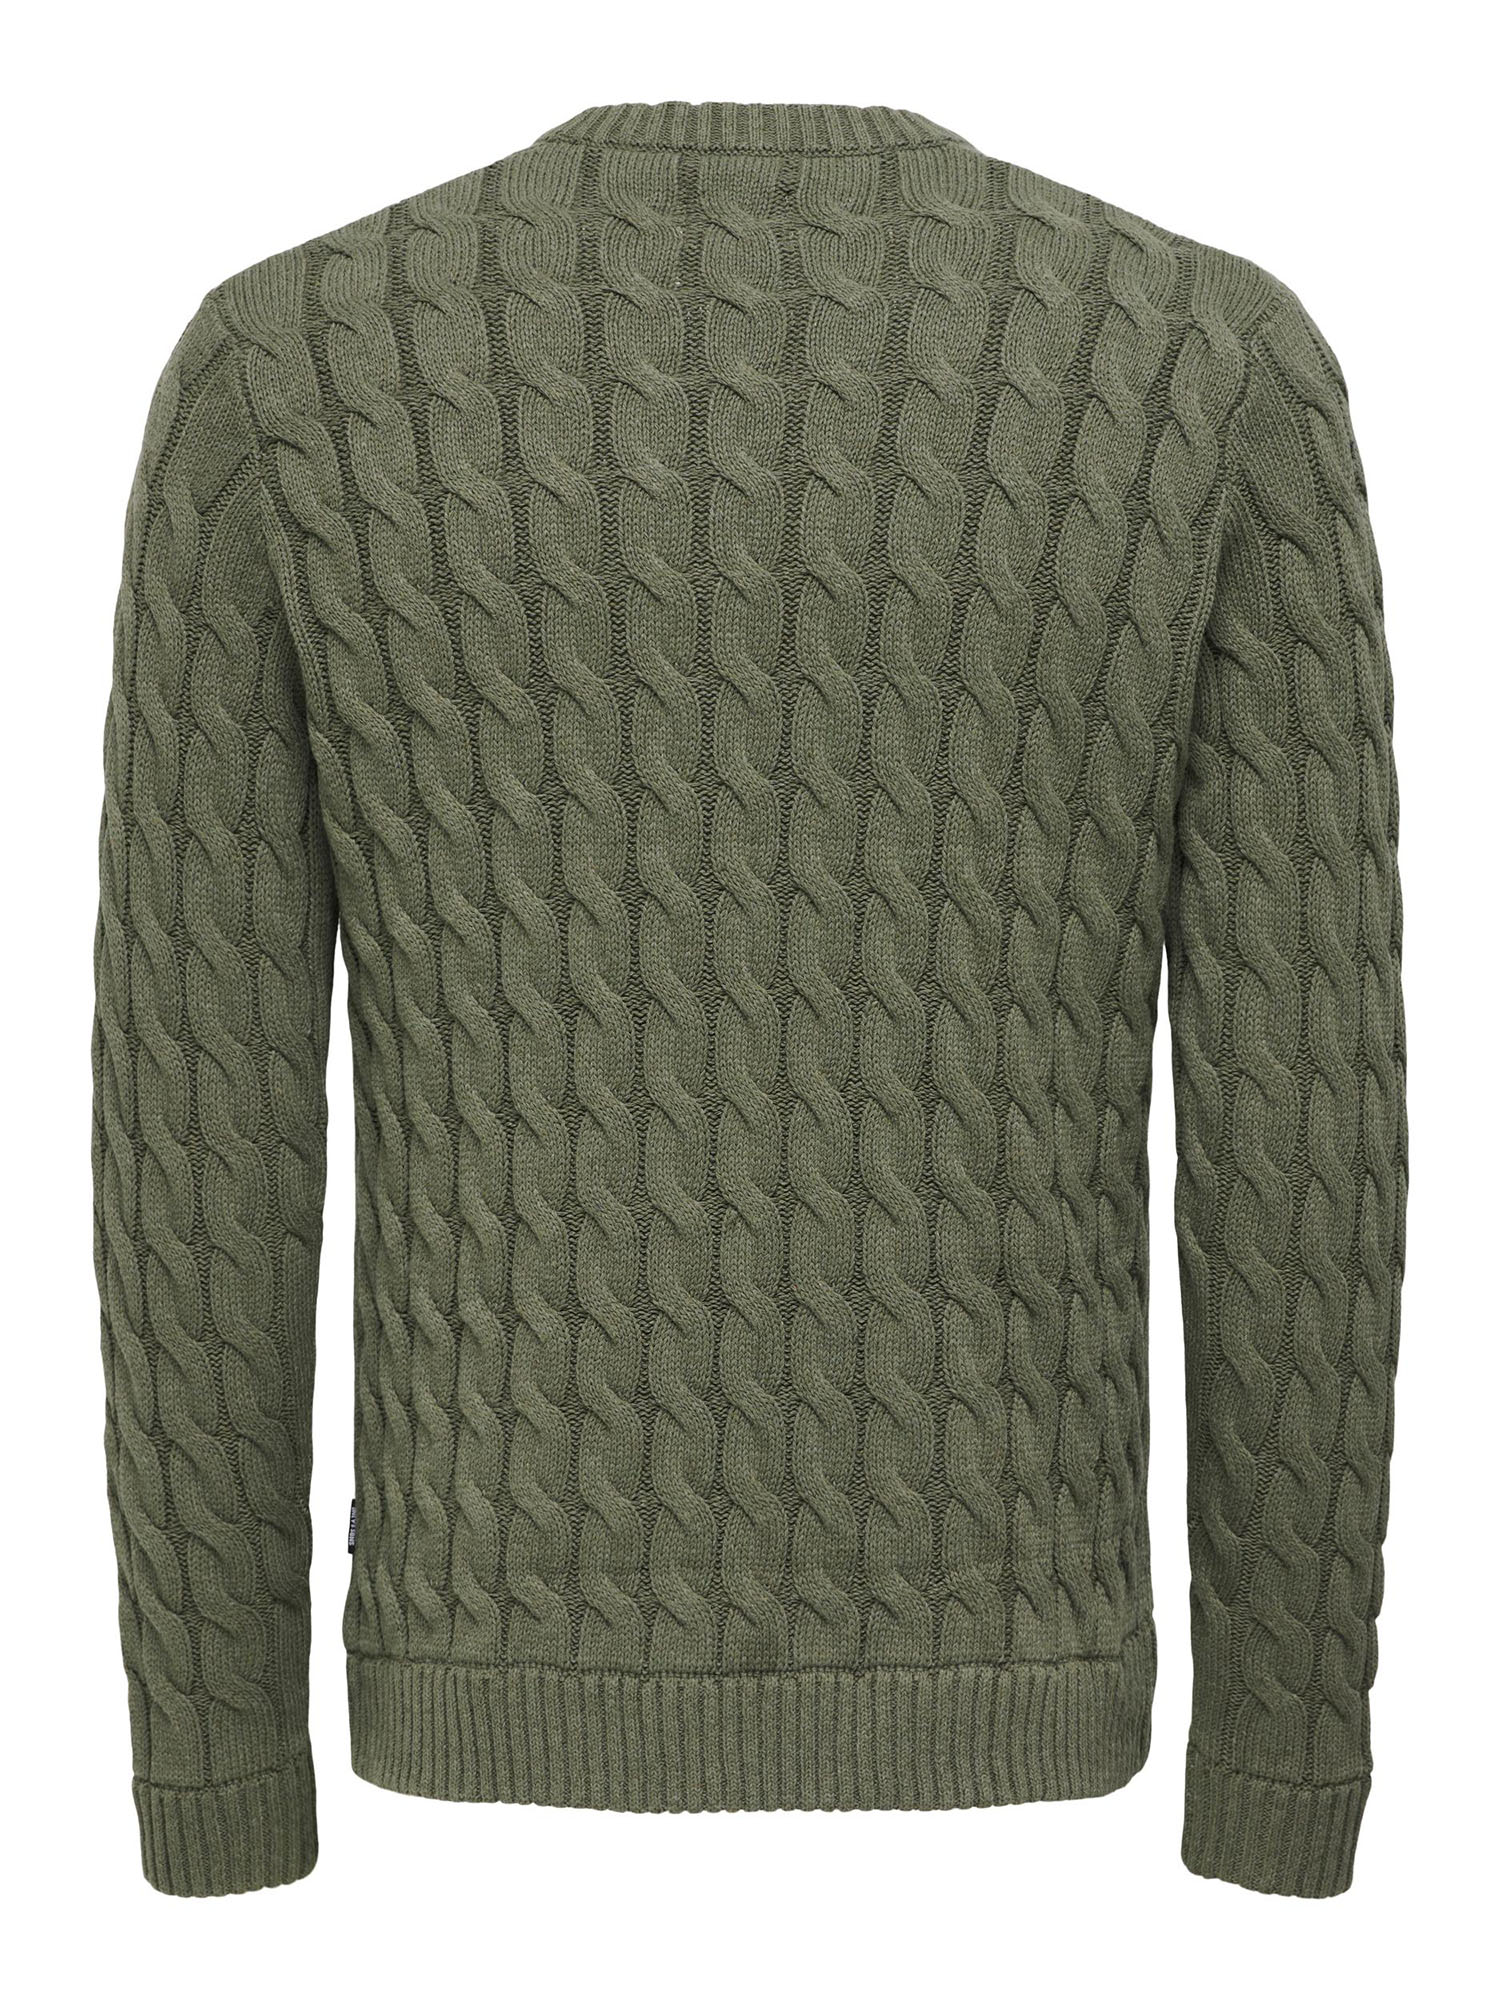 ONLY&SONS KICKER - VERDE MILITARE